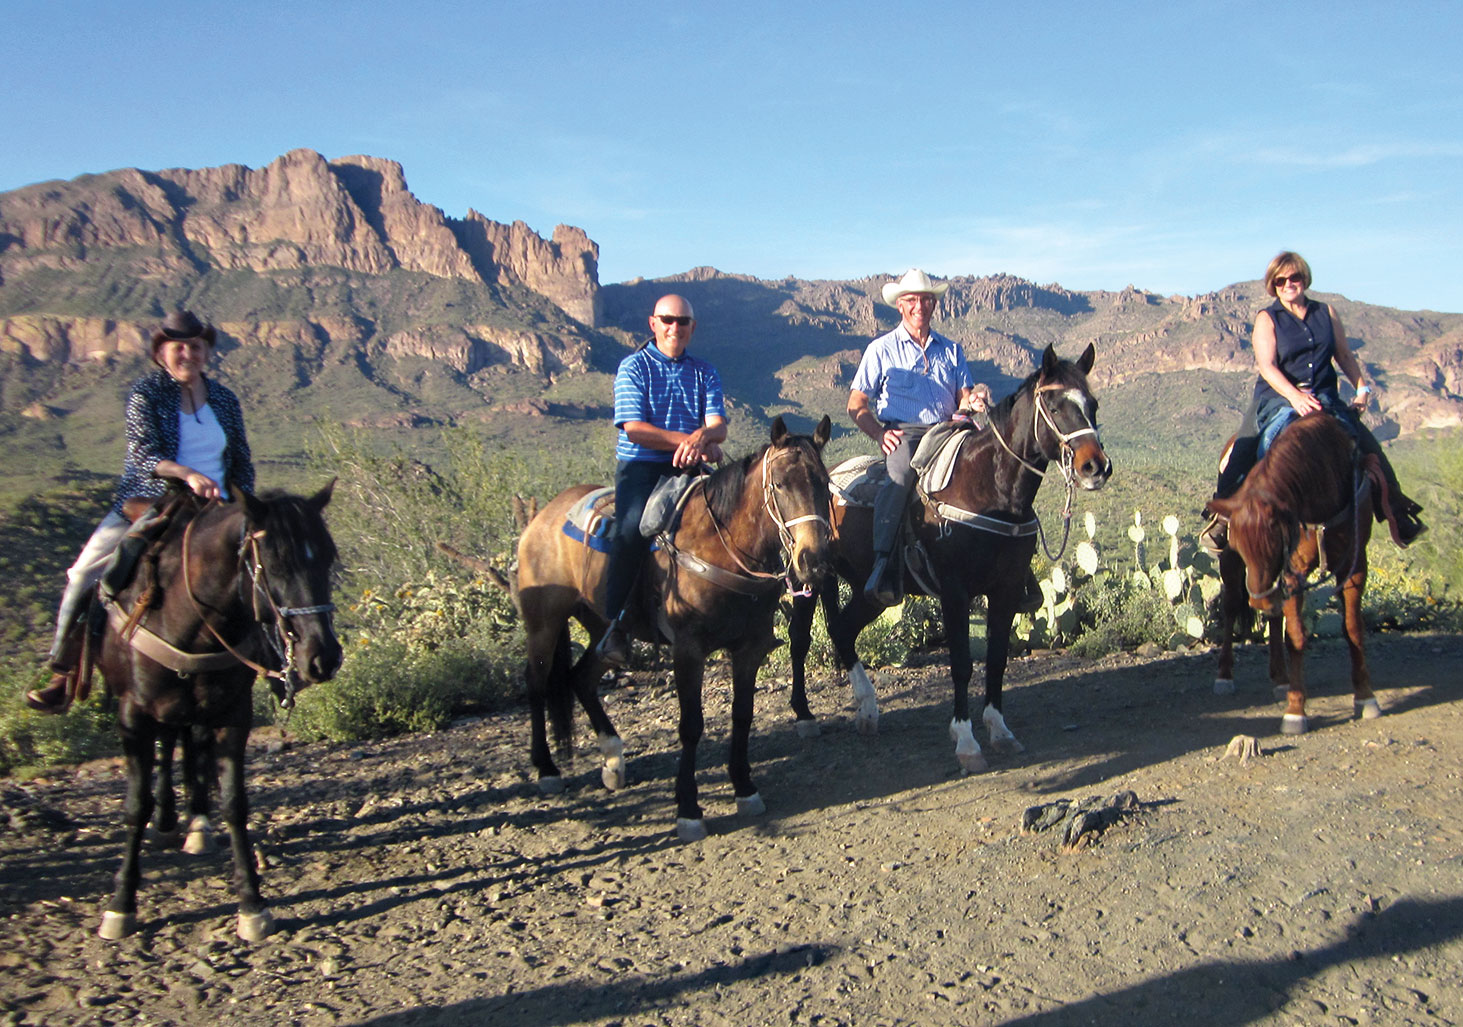 Left to right: Rebecca Williams, Doug Rinke, Don Williams and Lee Rinke enjoy a beautiful view of the Superstition Mountains.